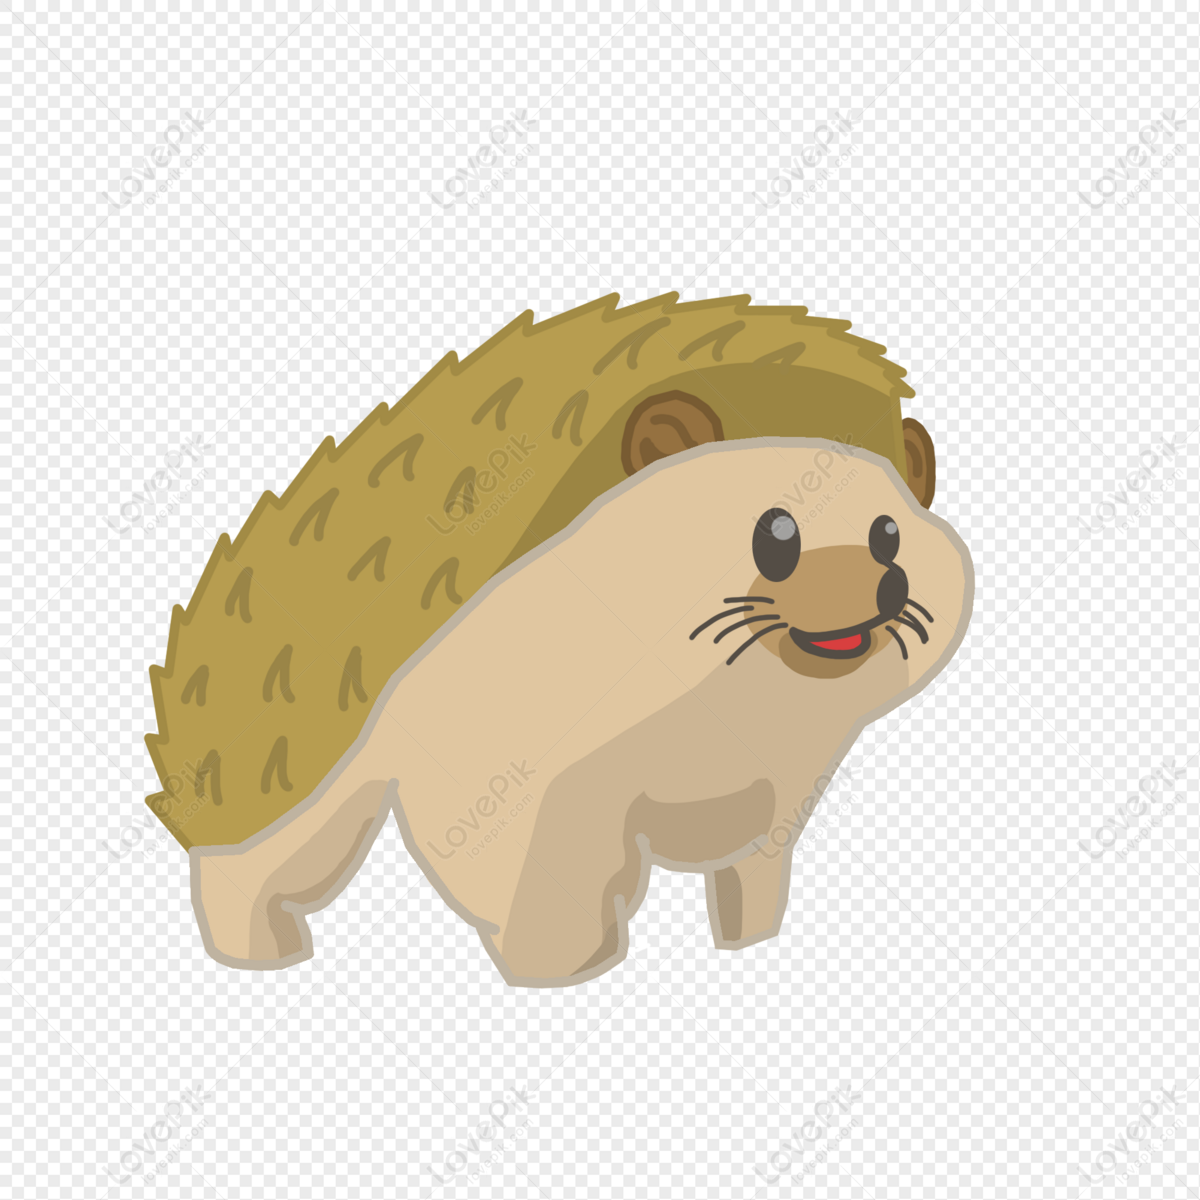 Cartoon Hedgehog PNG Transparent Background And Clipart Image For Free  Download - Lovepik | 401525270